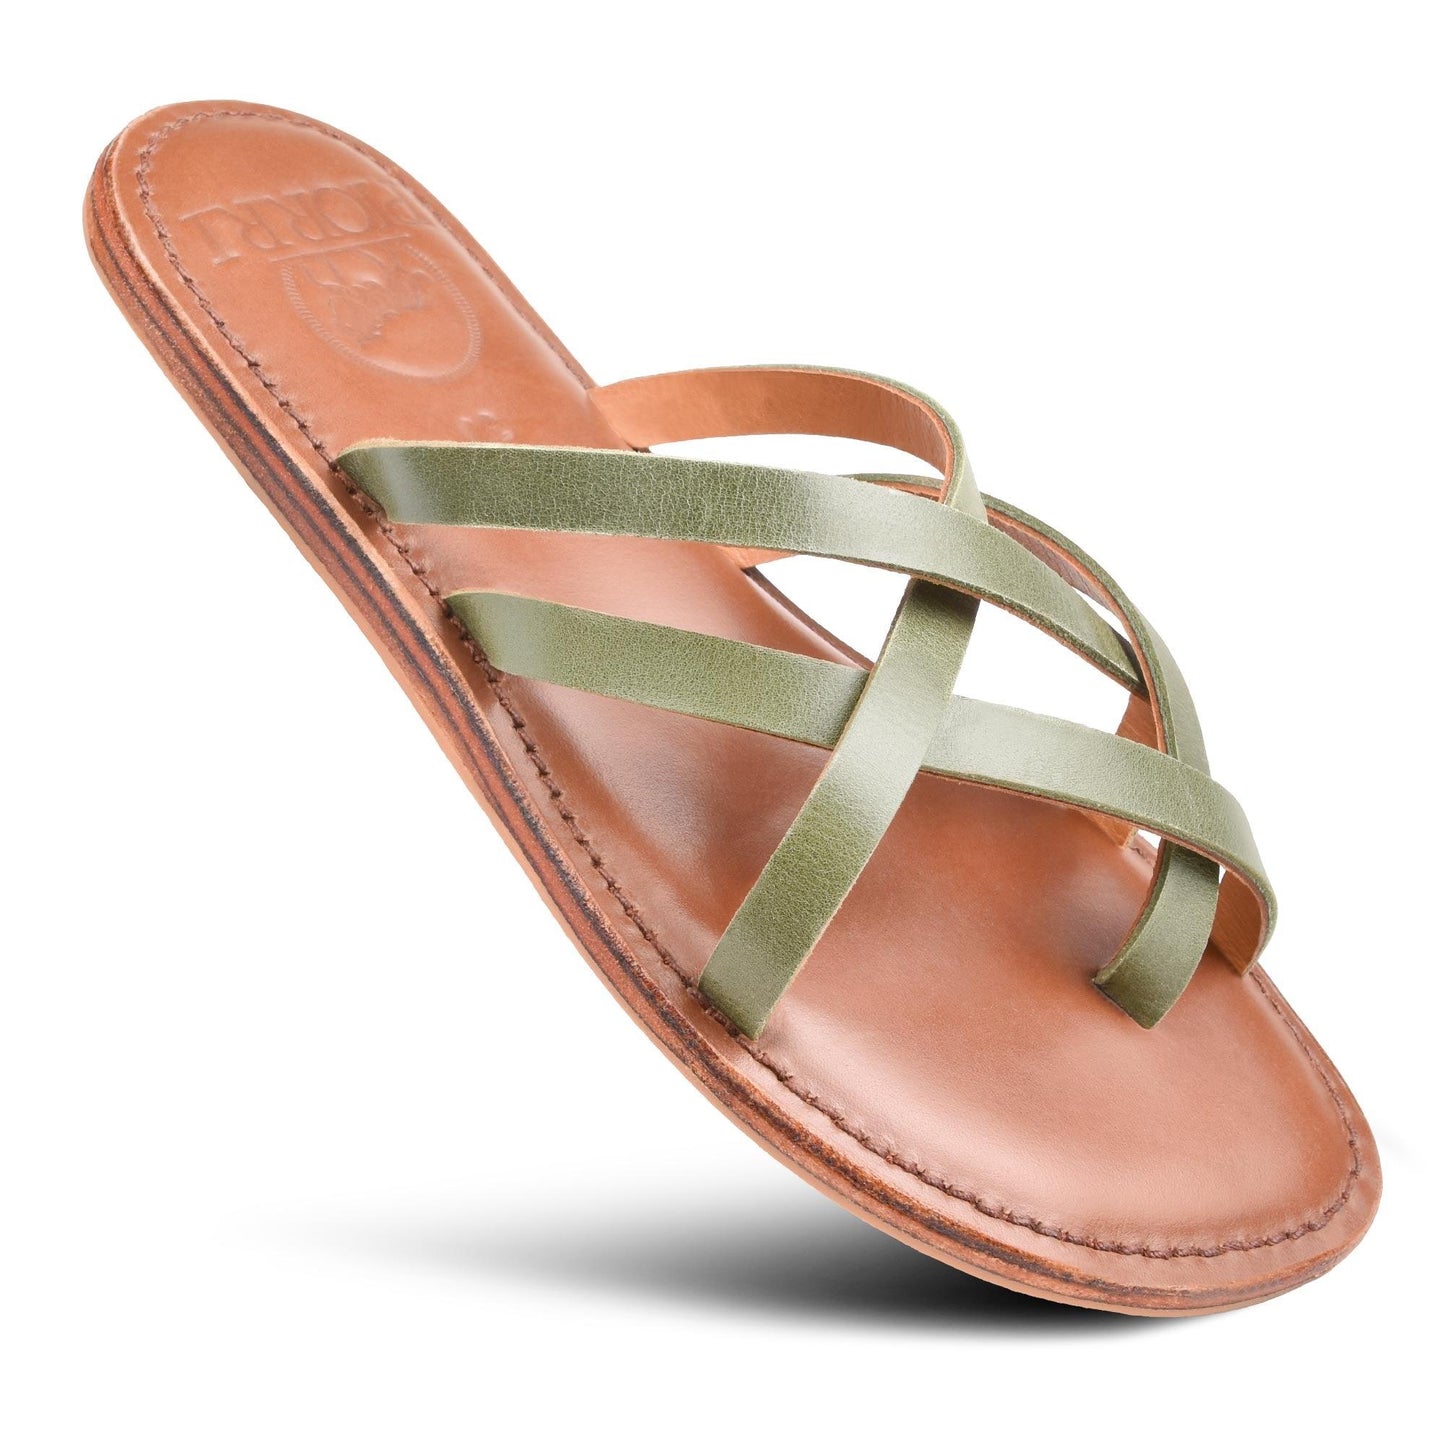 PIORRI by Aerothotic - Dione Women’s Split Toe Strappy Natural Leather Slide Sandals - LK2107